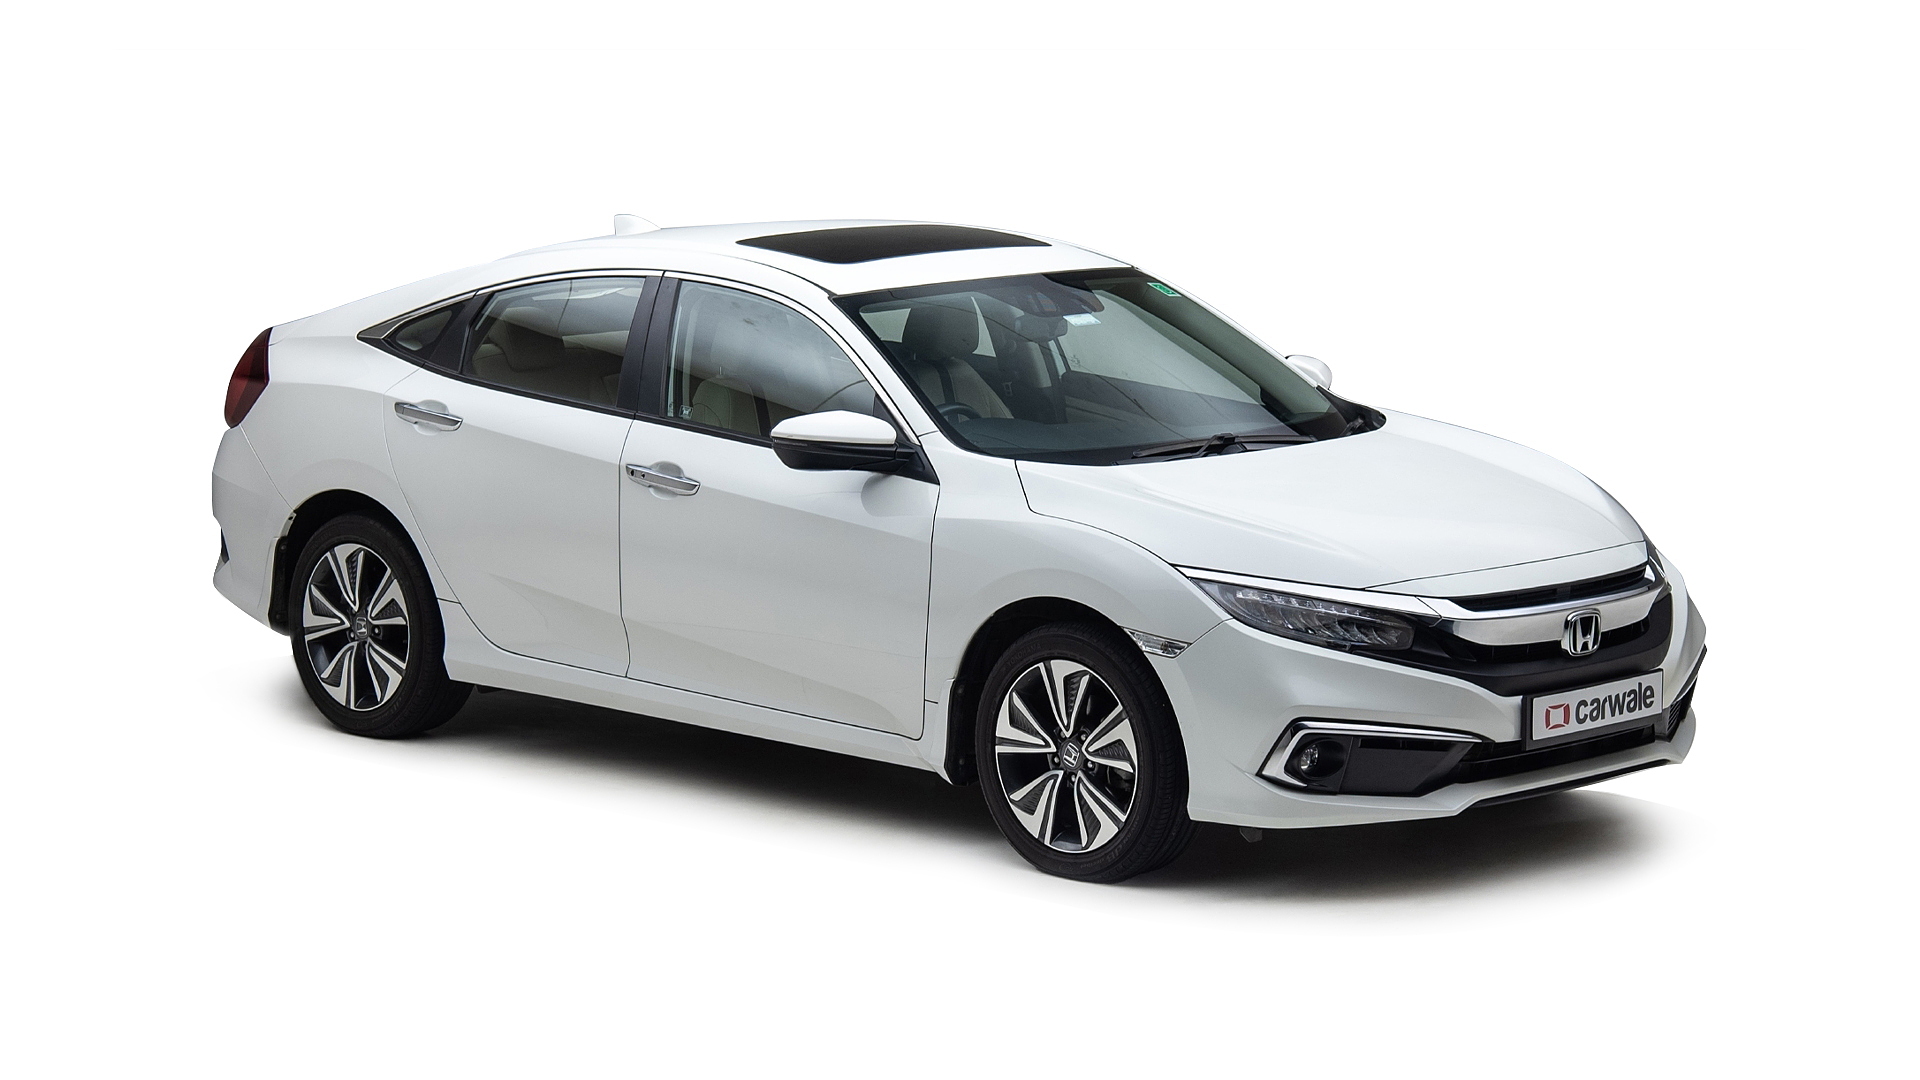 Honda Civic March 2021 Price, Images, Mileage & Colours - CarWale